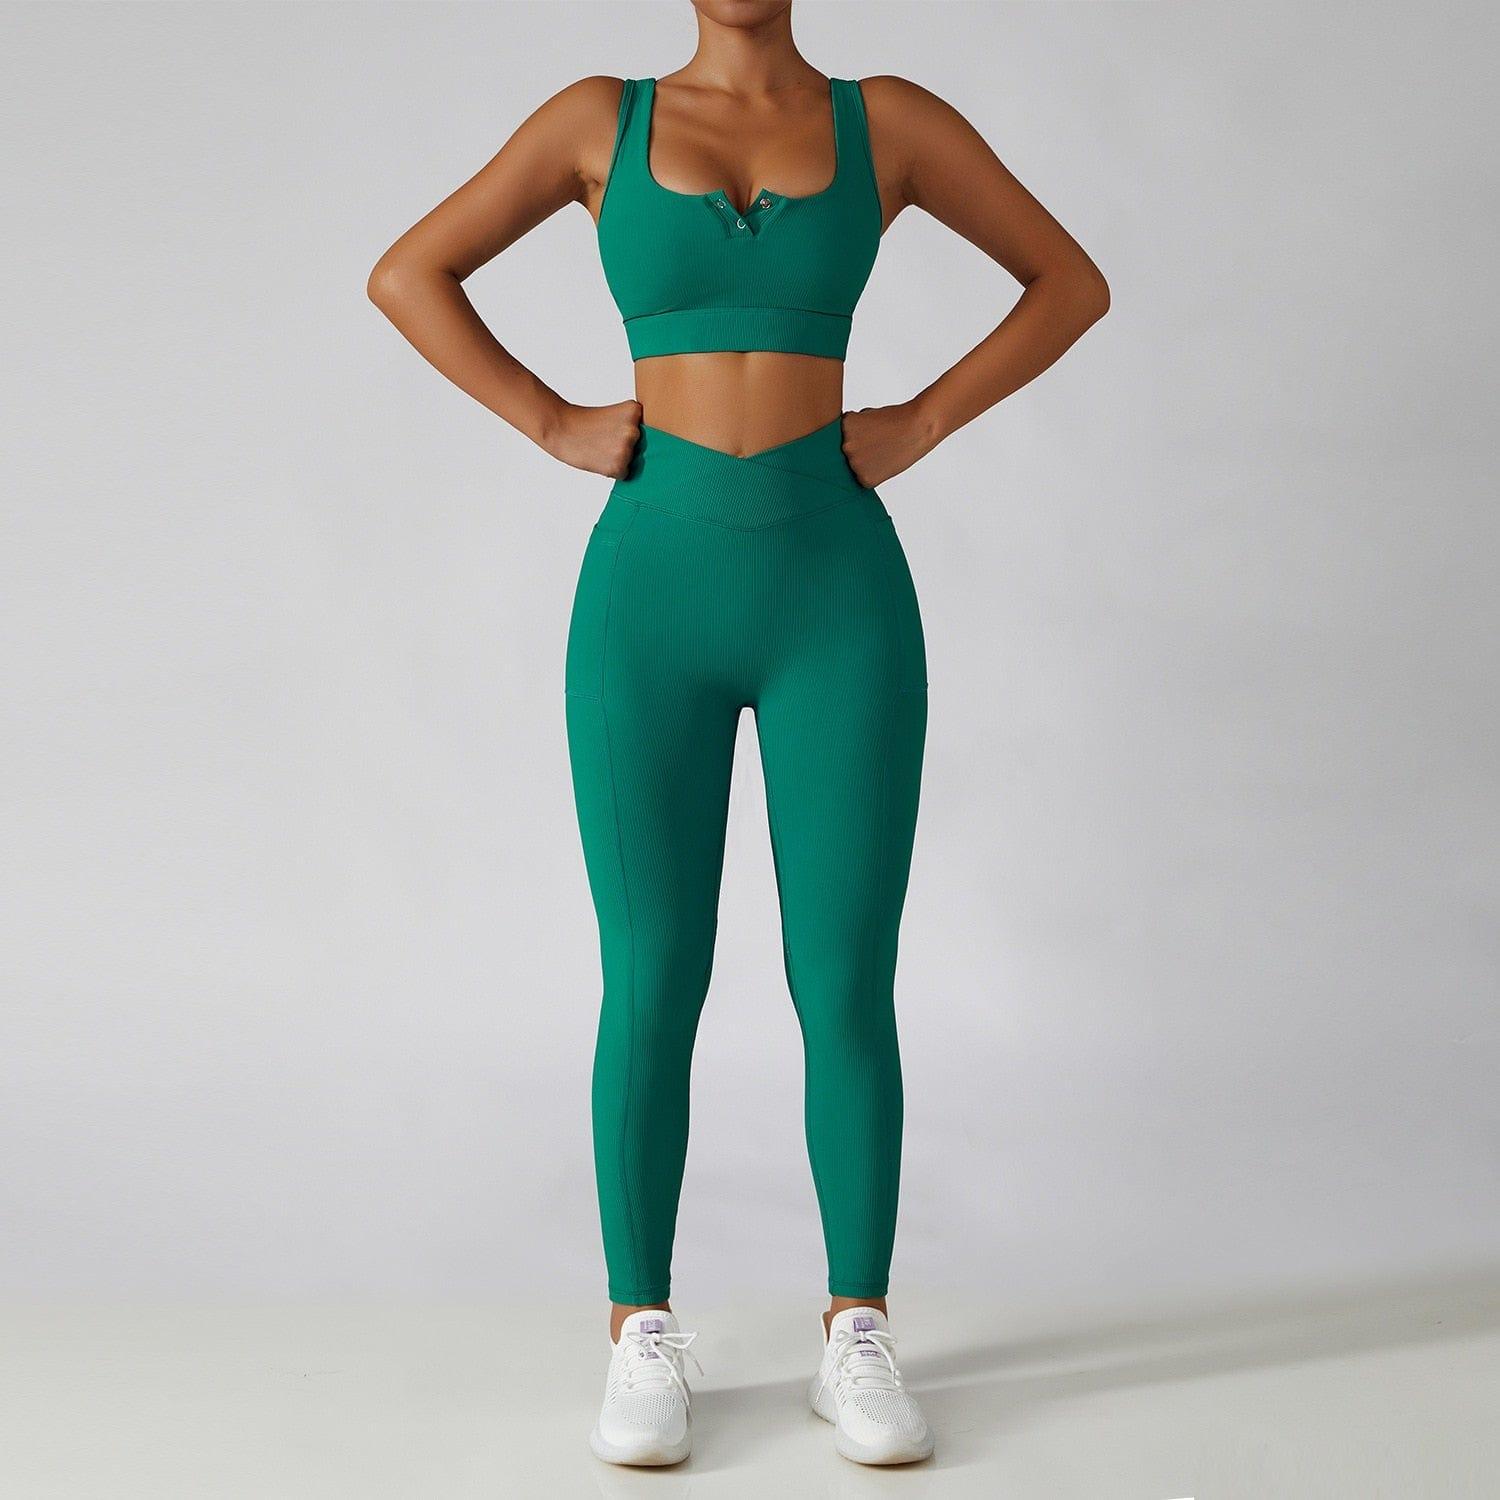 Shop 0 Green suit-3 / S / China 2 Pieces Seamless Women Tracksuit  Yoga Set Running Workout Sportswear Gym Clothes Fitness Bra High Waist Leggings Sports Suit Mademoiselle Home Decor